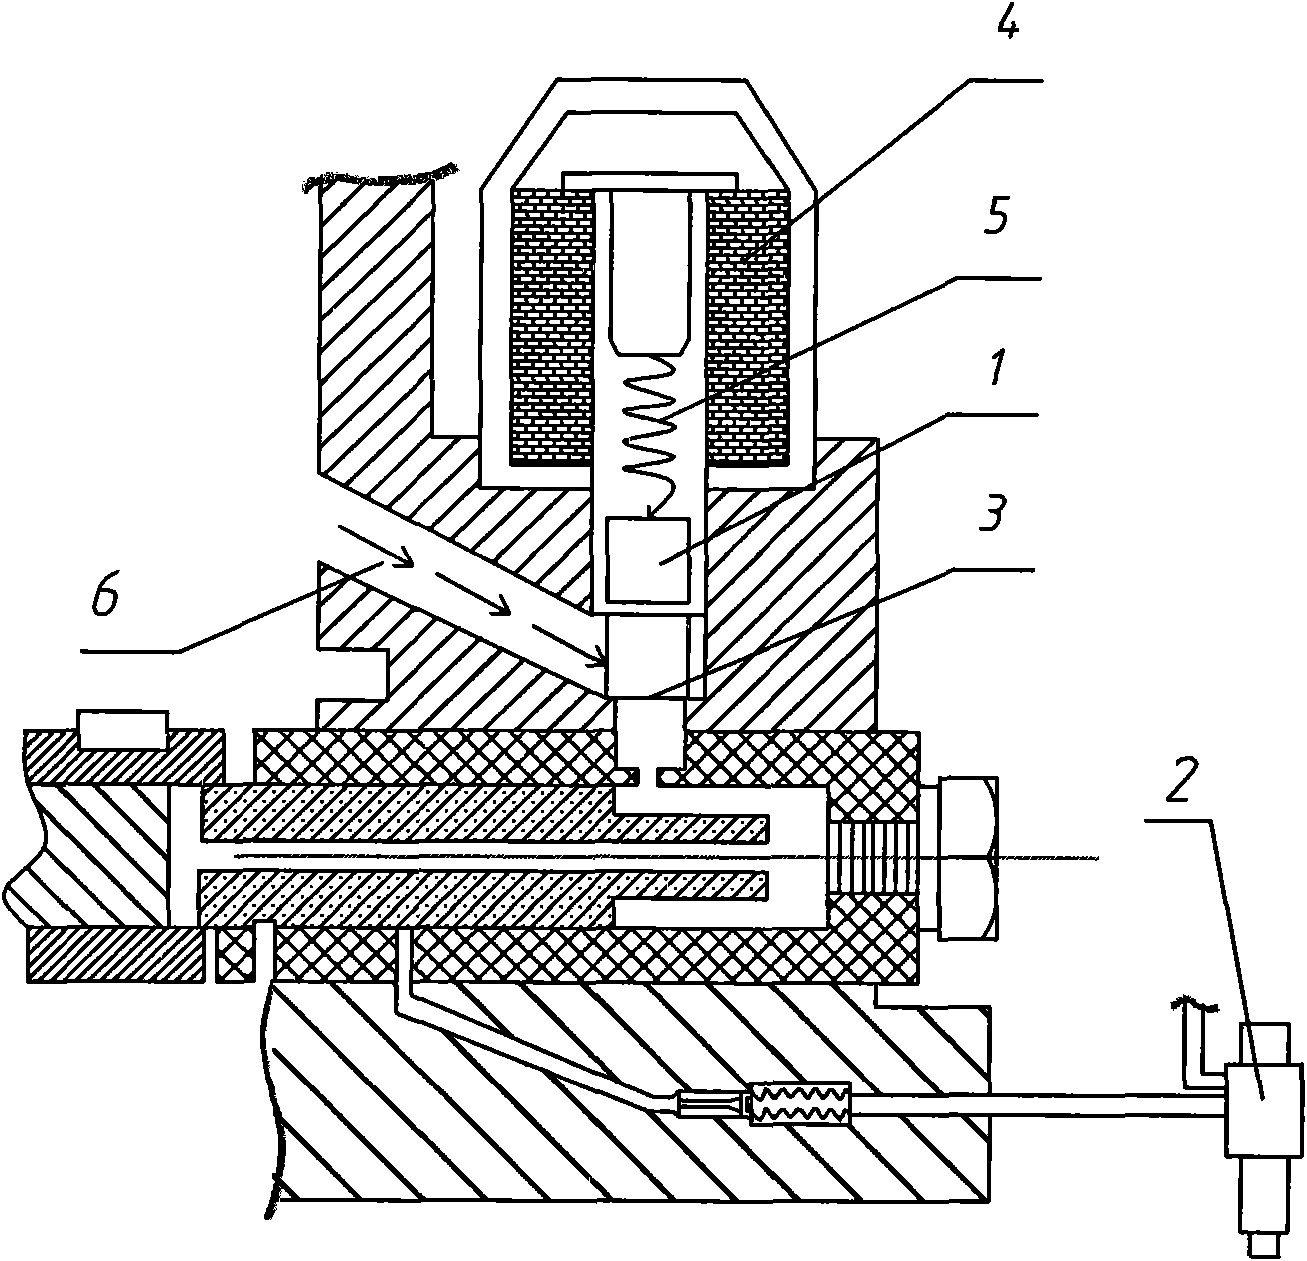 Method of judging accelerator instead of brake and method of automatic brake